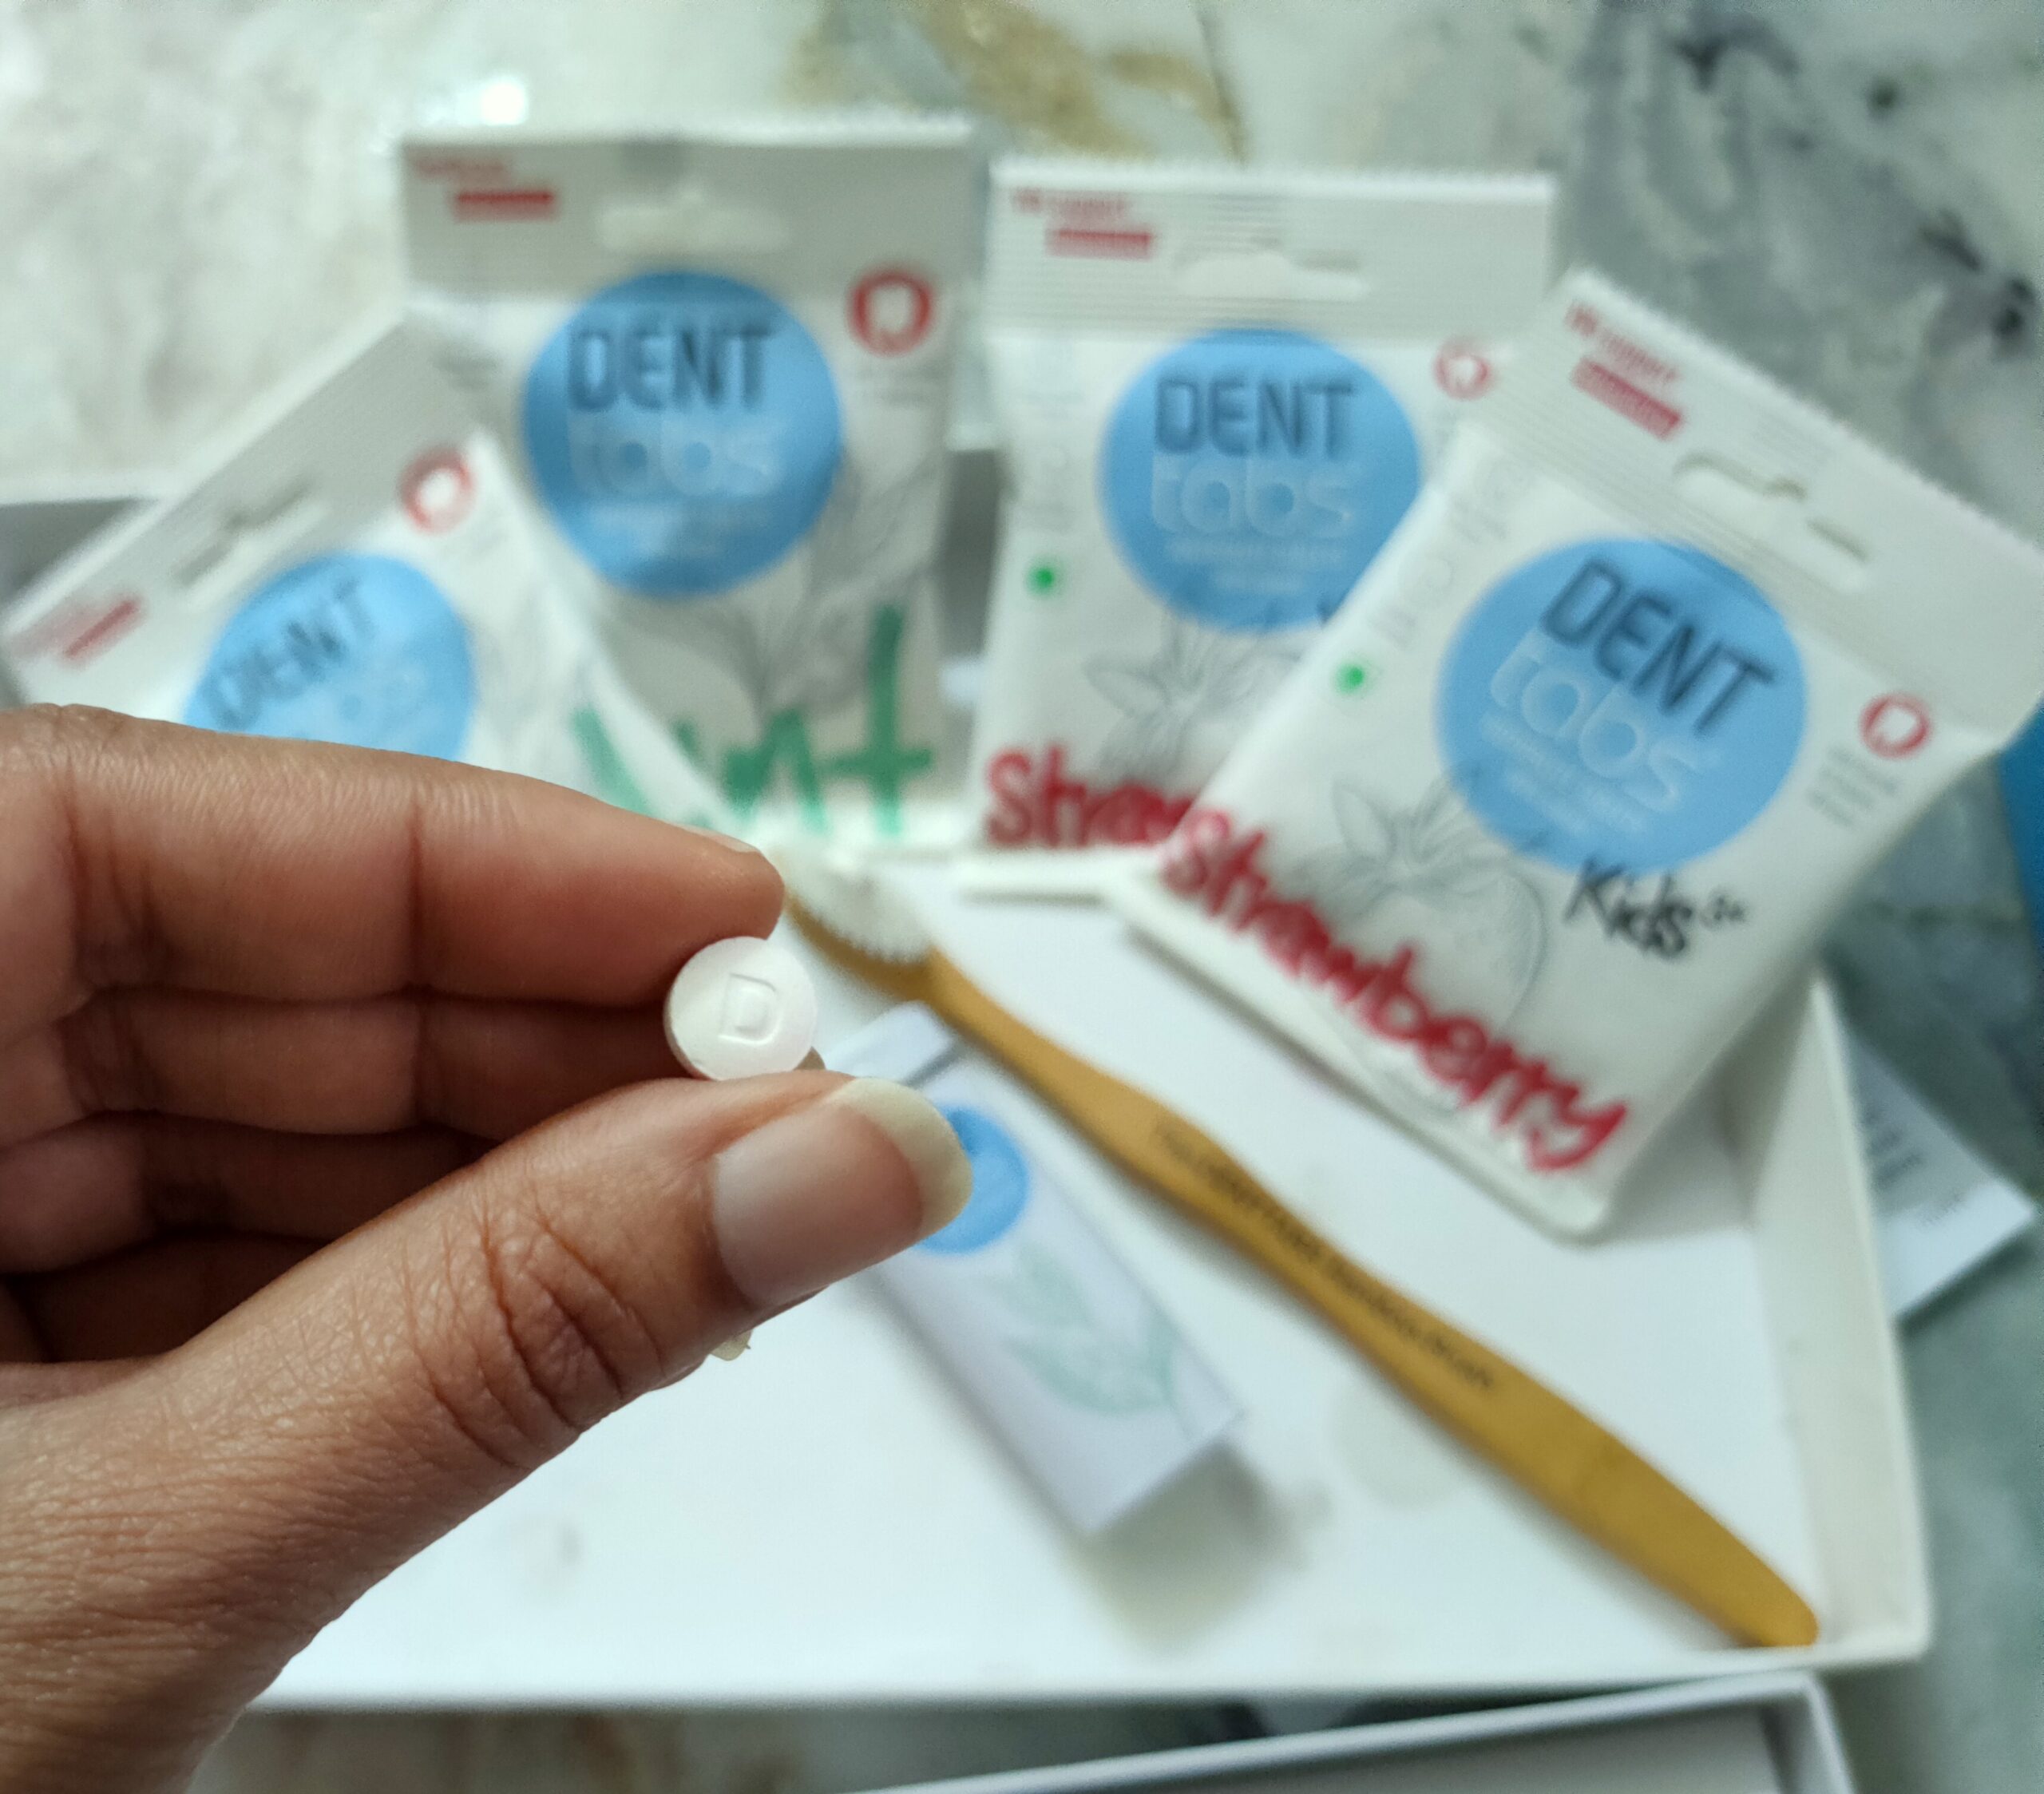 DENTTabs Toothpaste Tablets Review